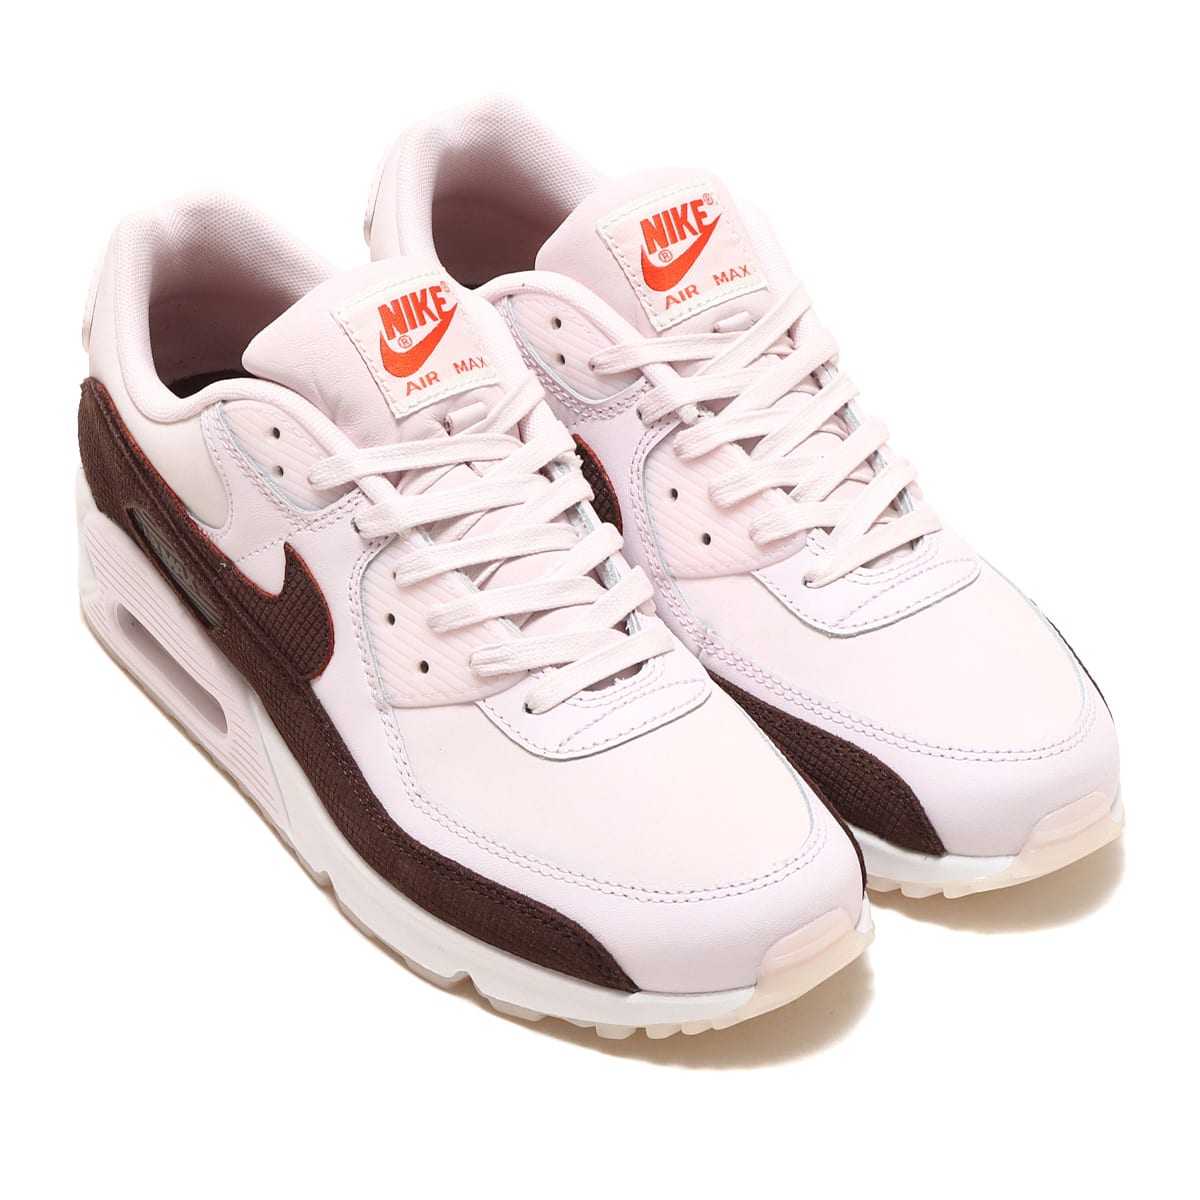 NIKE AIR MAX 90 LTR PEARL PINK/BAROQUE BROWN-BAROQUE BROWN 23SP-I_photo_large